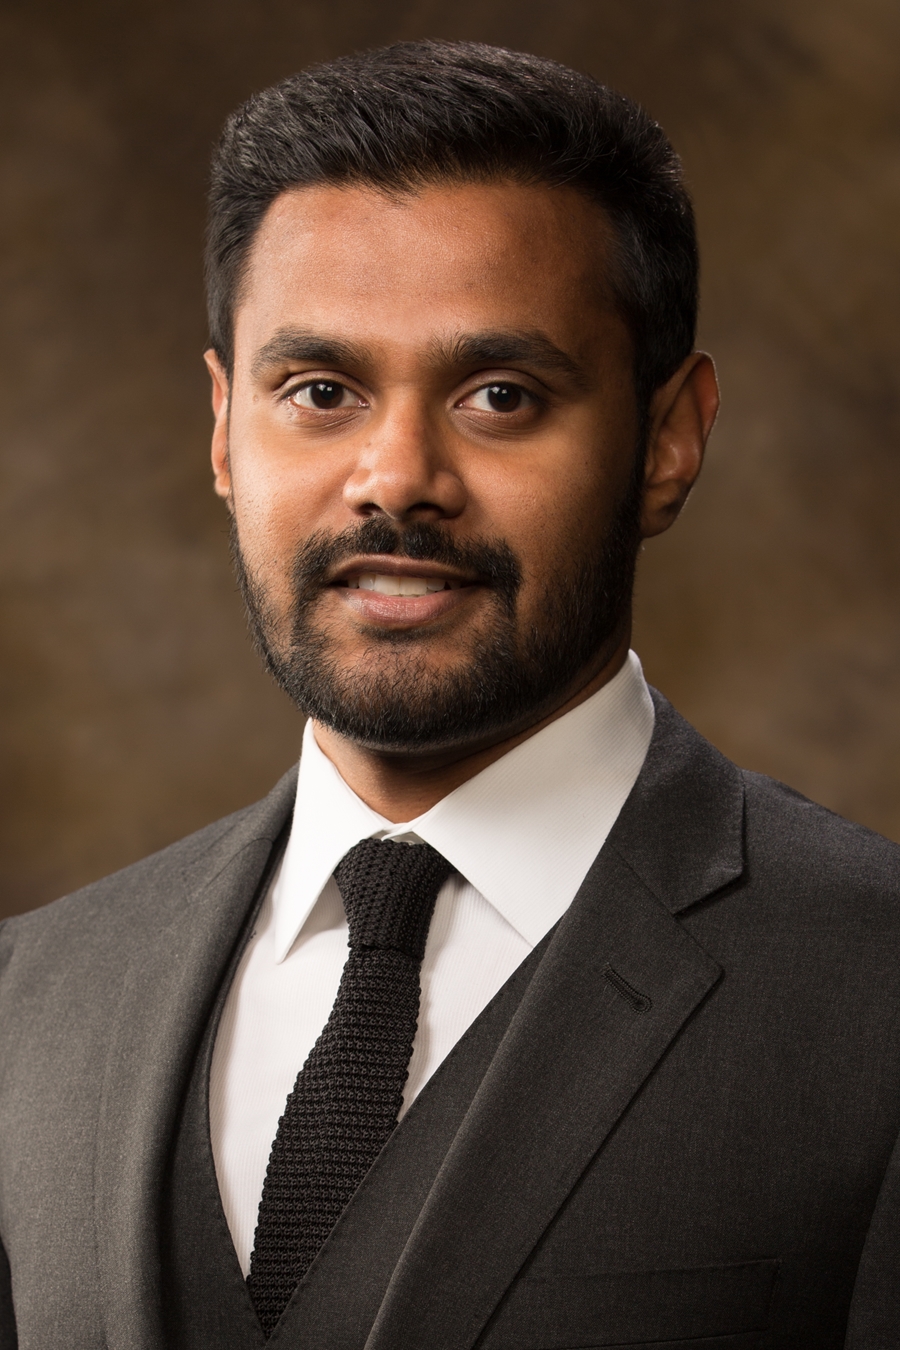 Mervin Jebaraj, director of the Center for Business and Economic Research at the U of A.